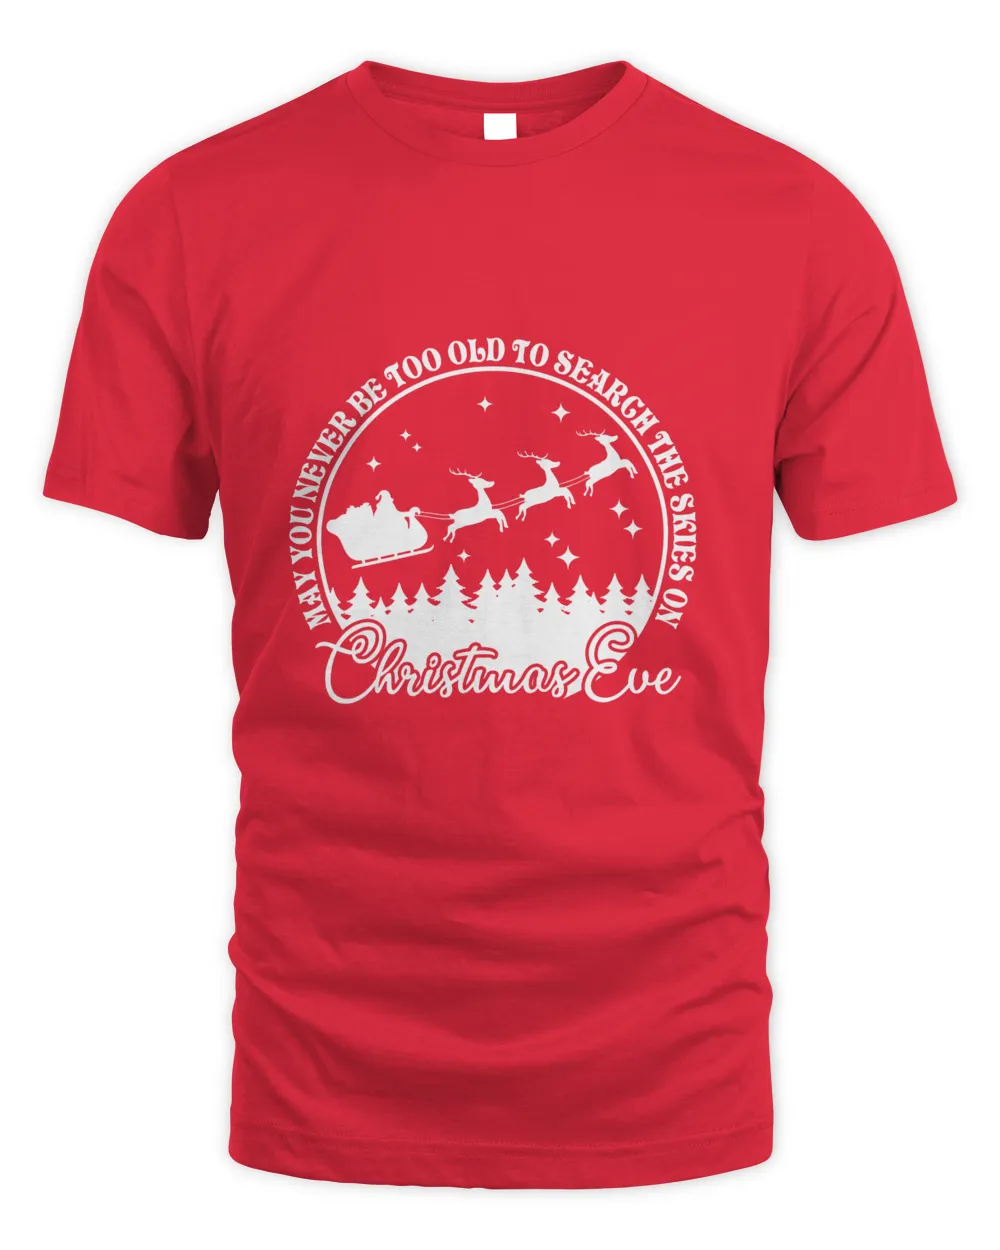 May You Never Be Too Old To Search The Skies On Christmas Eve Unisex Standard T-Shirt